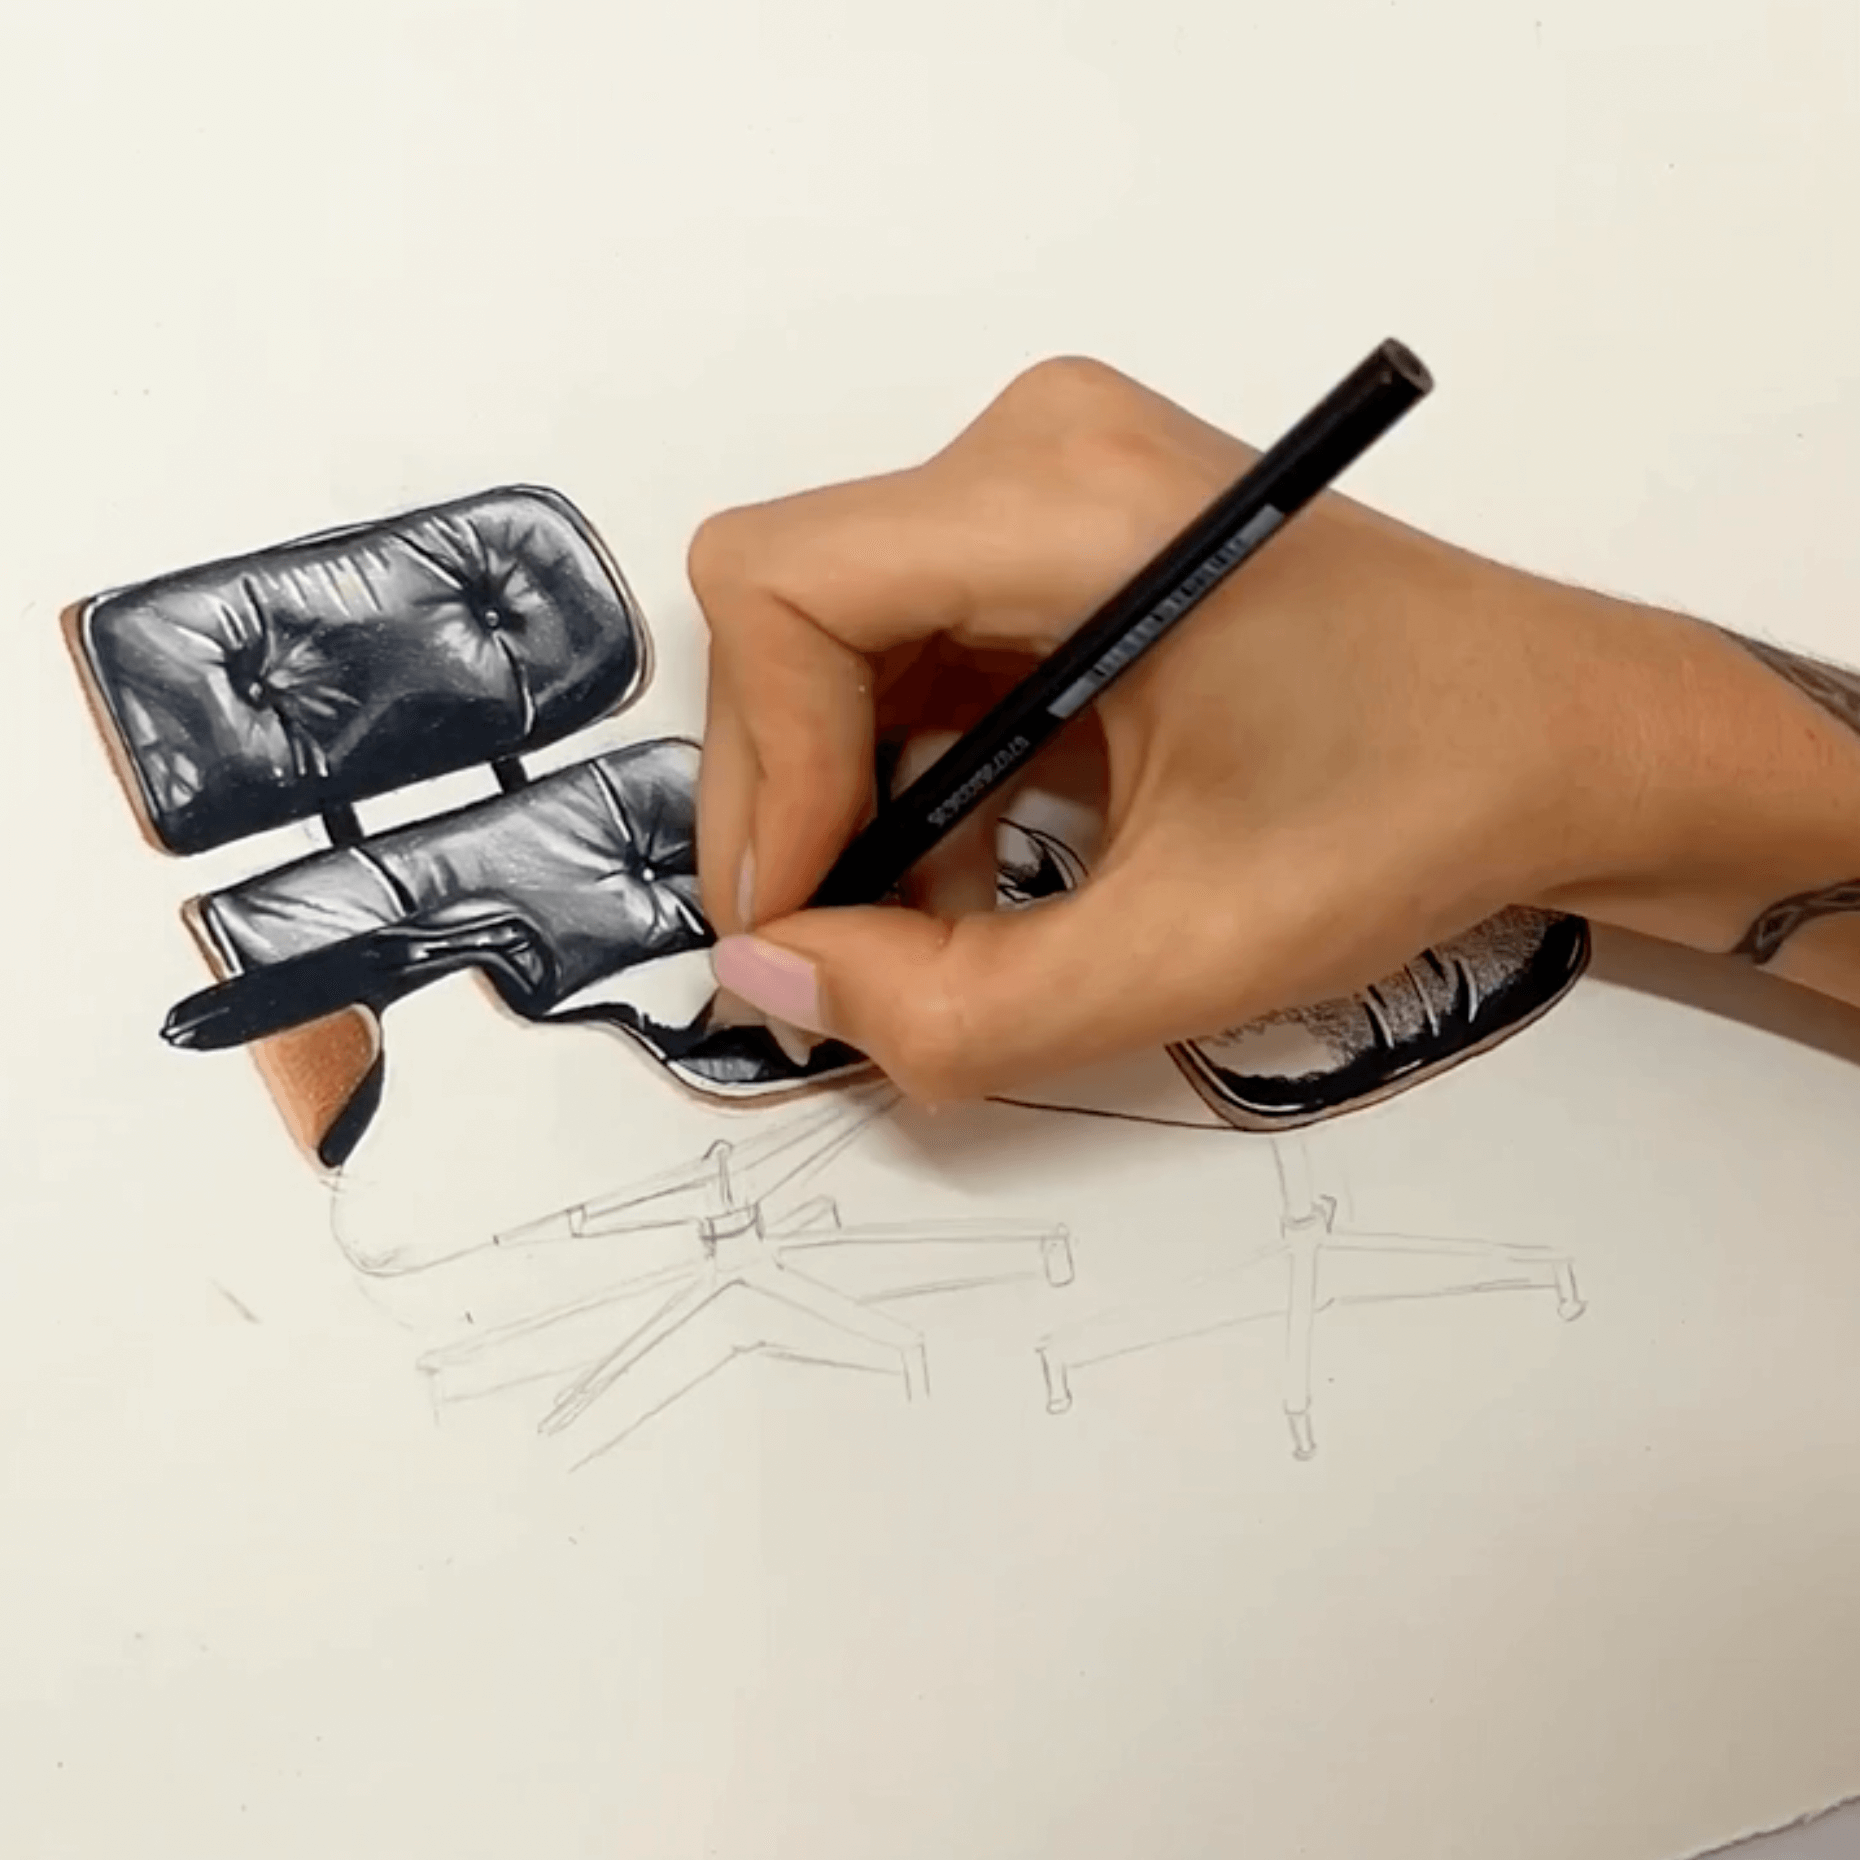 Woman's hand holding a pencil drawing an Eames Lounge Chair in a timelapse.